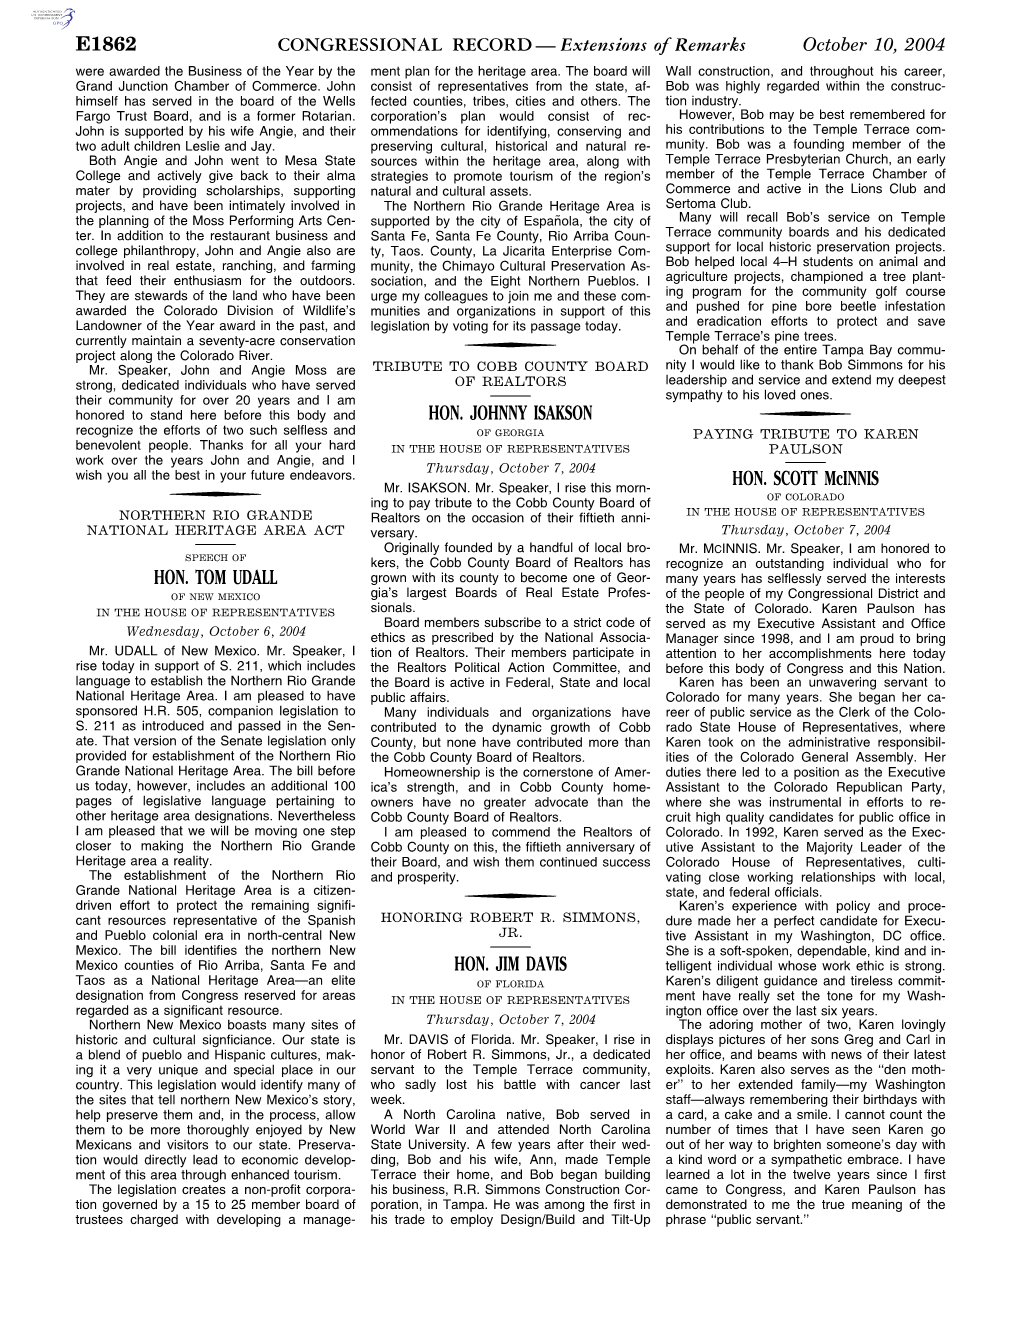 CONGRESSIONAL RECORD— Extensions of Remarks E1862 HON